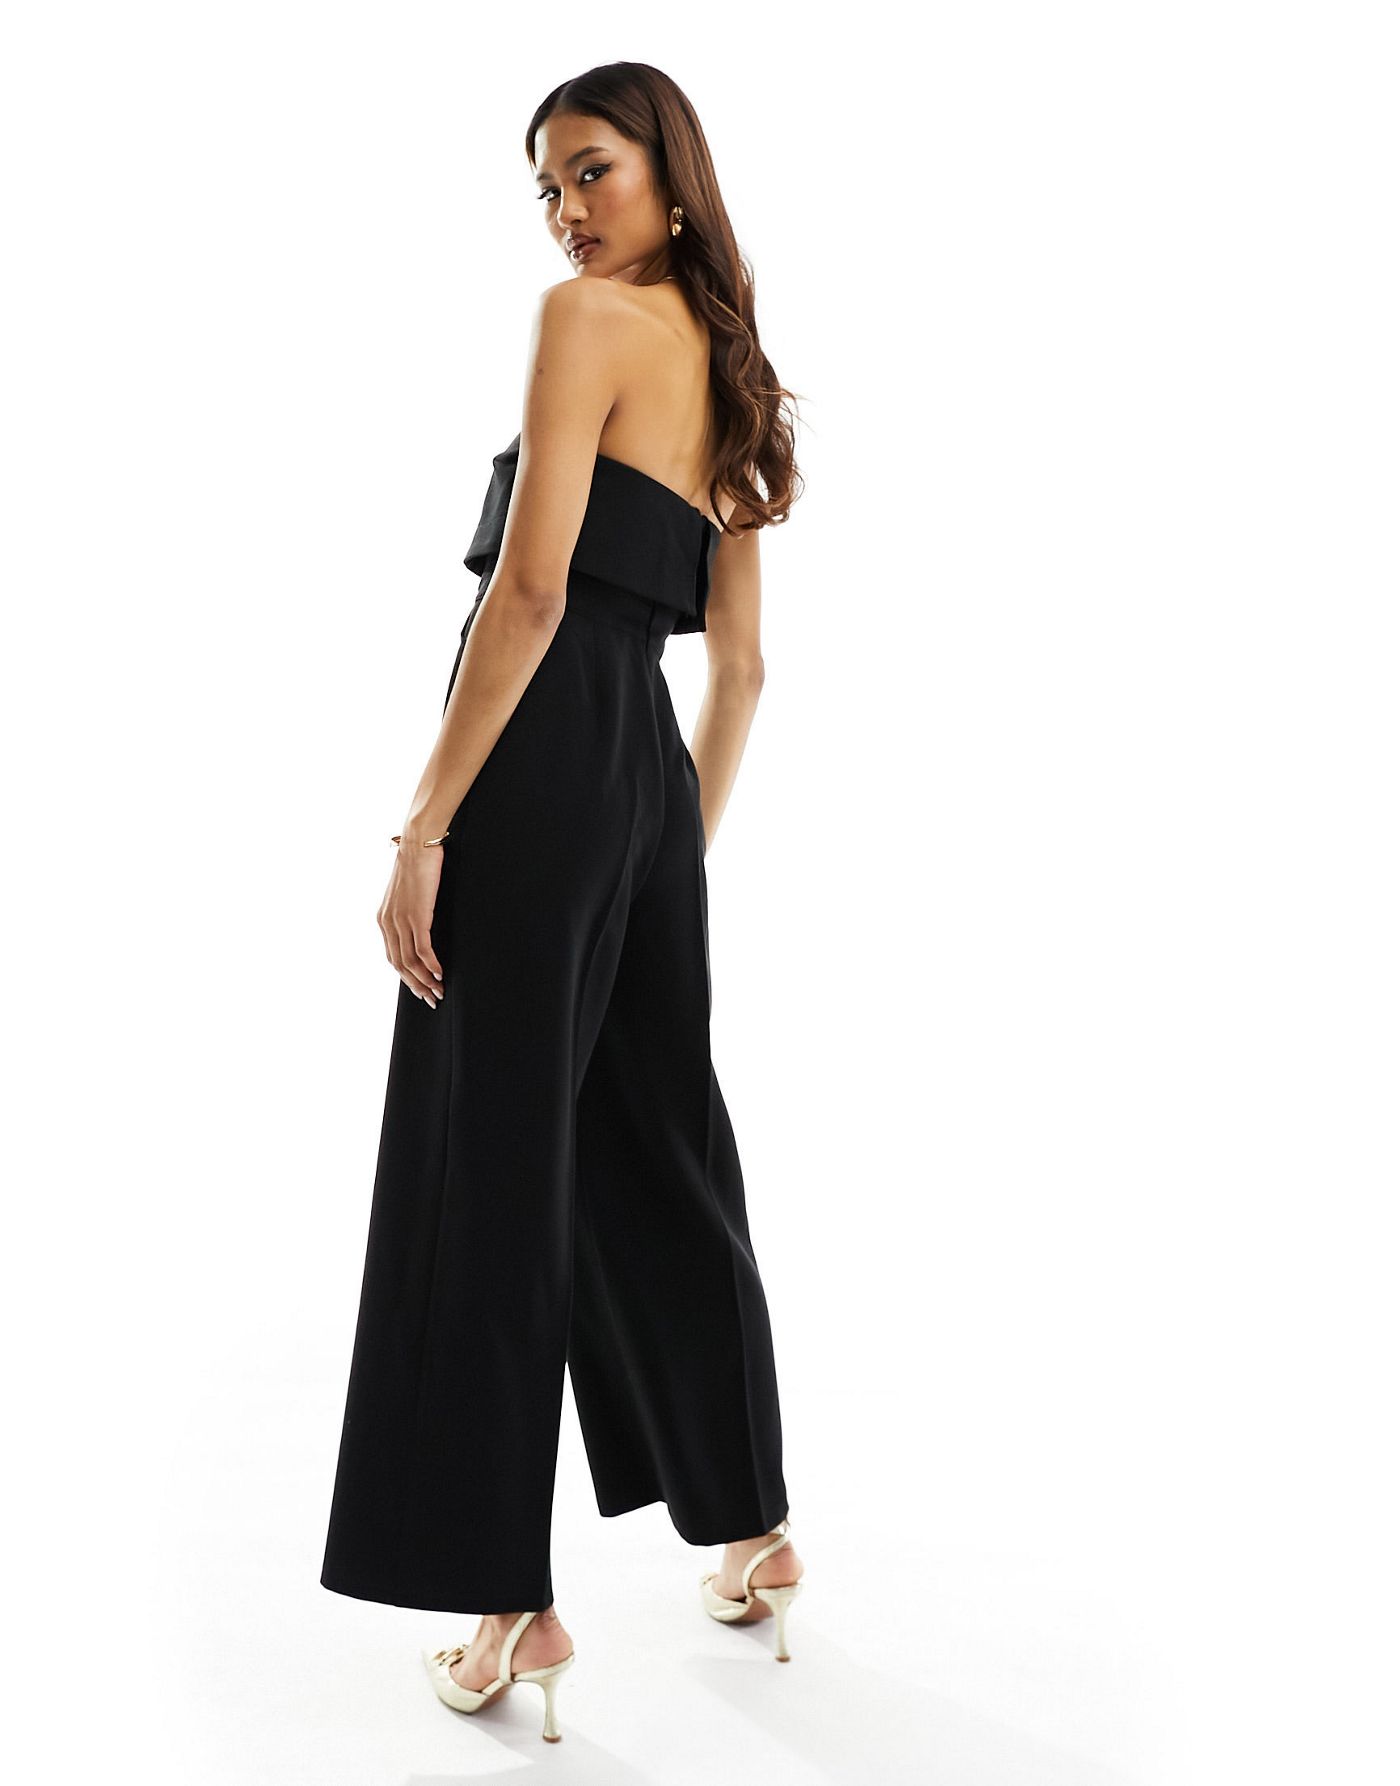 River Island bandeau tailored jumpsuit in black